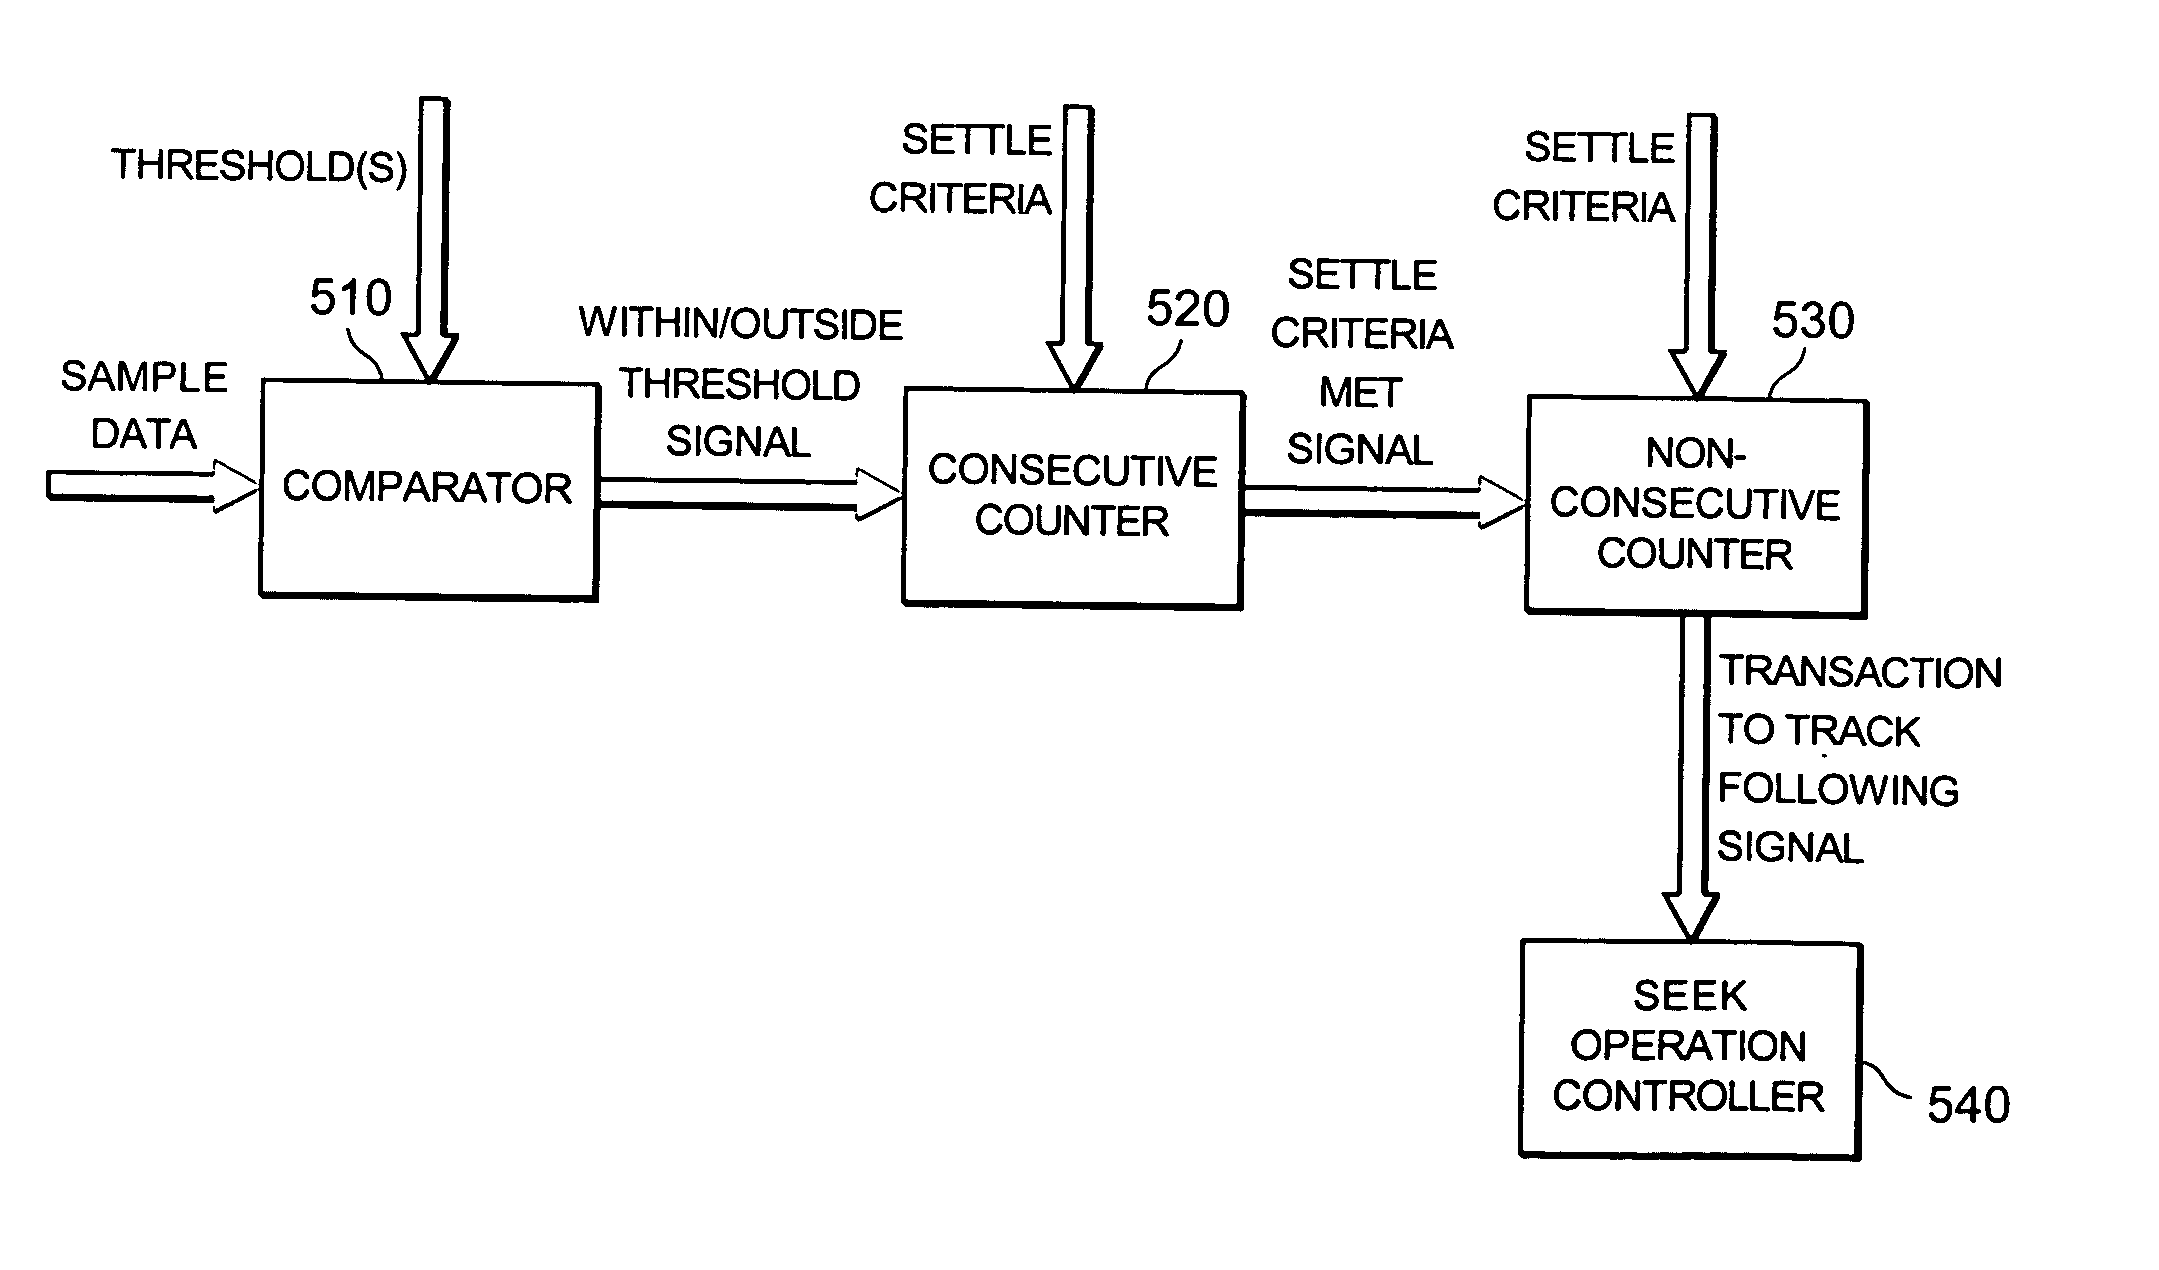 Non-consecutive transitional mechanism for seek operations when transitioning from a seek control to a track following control